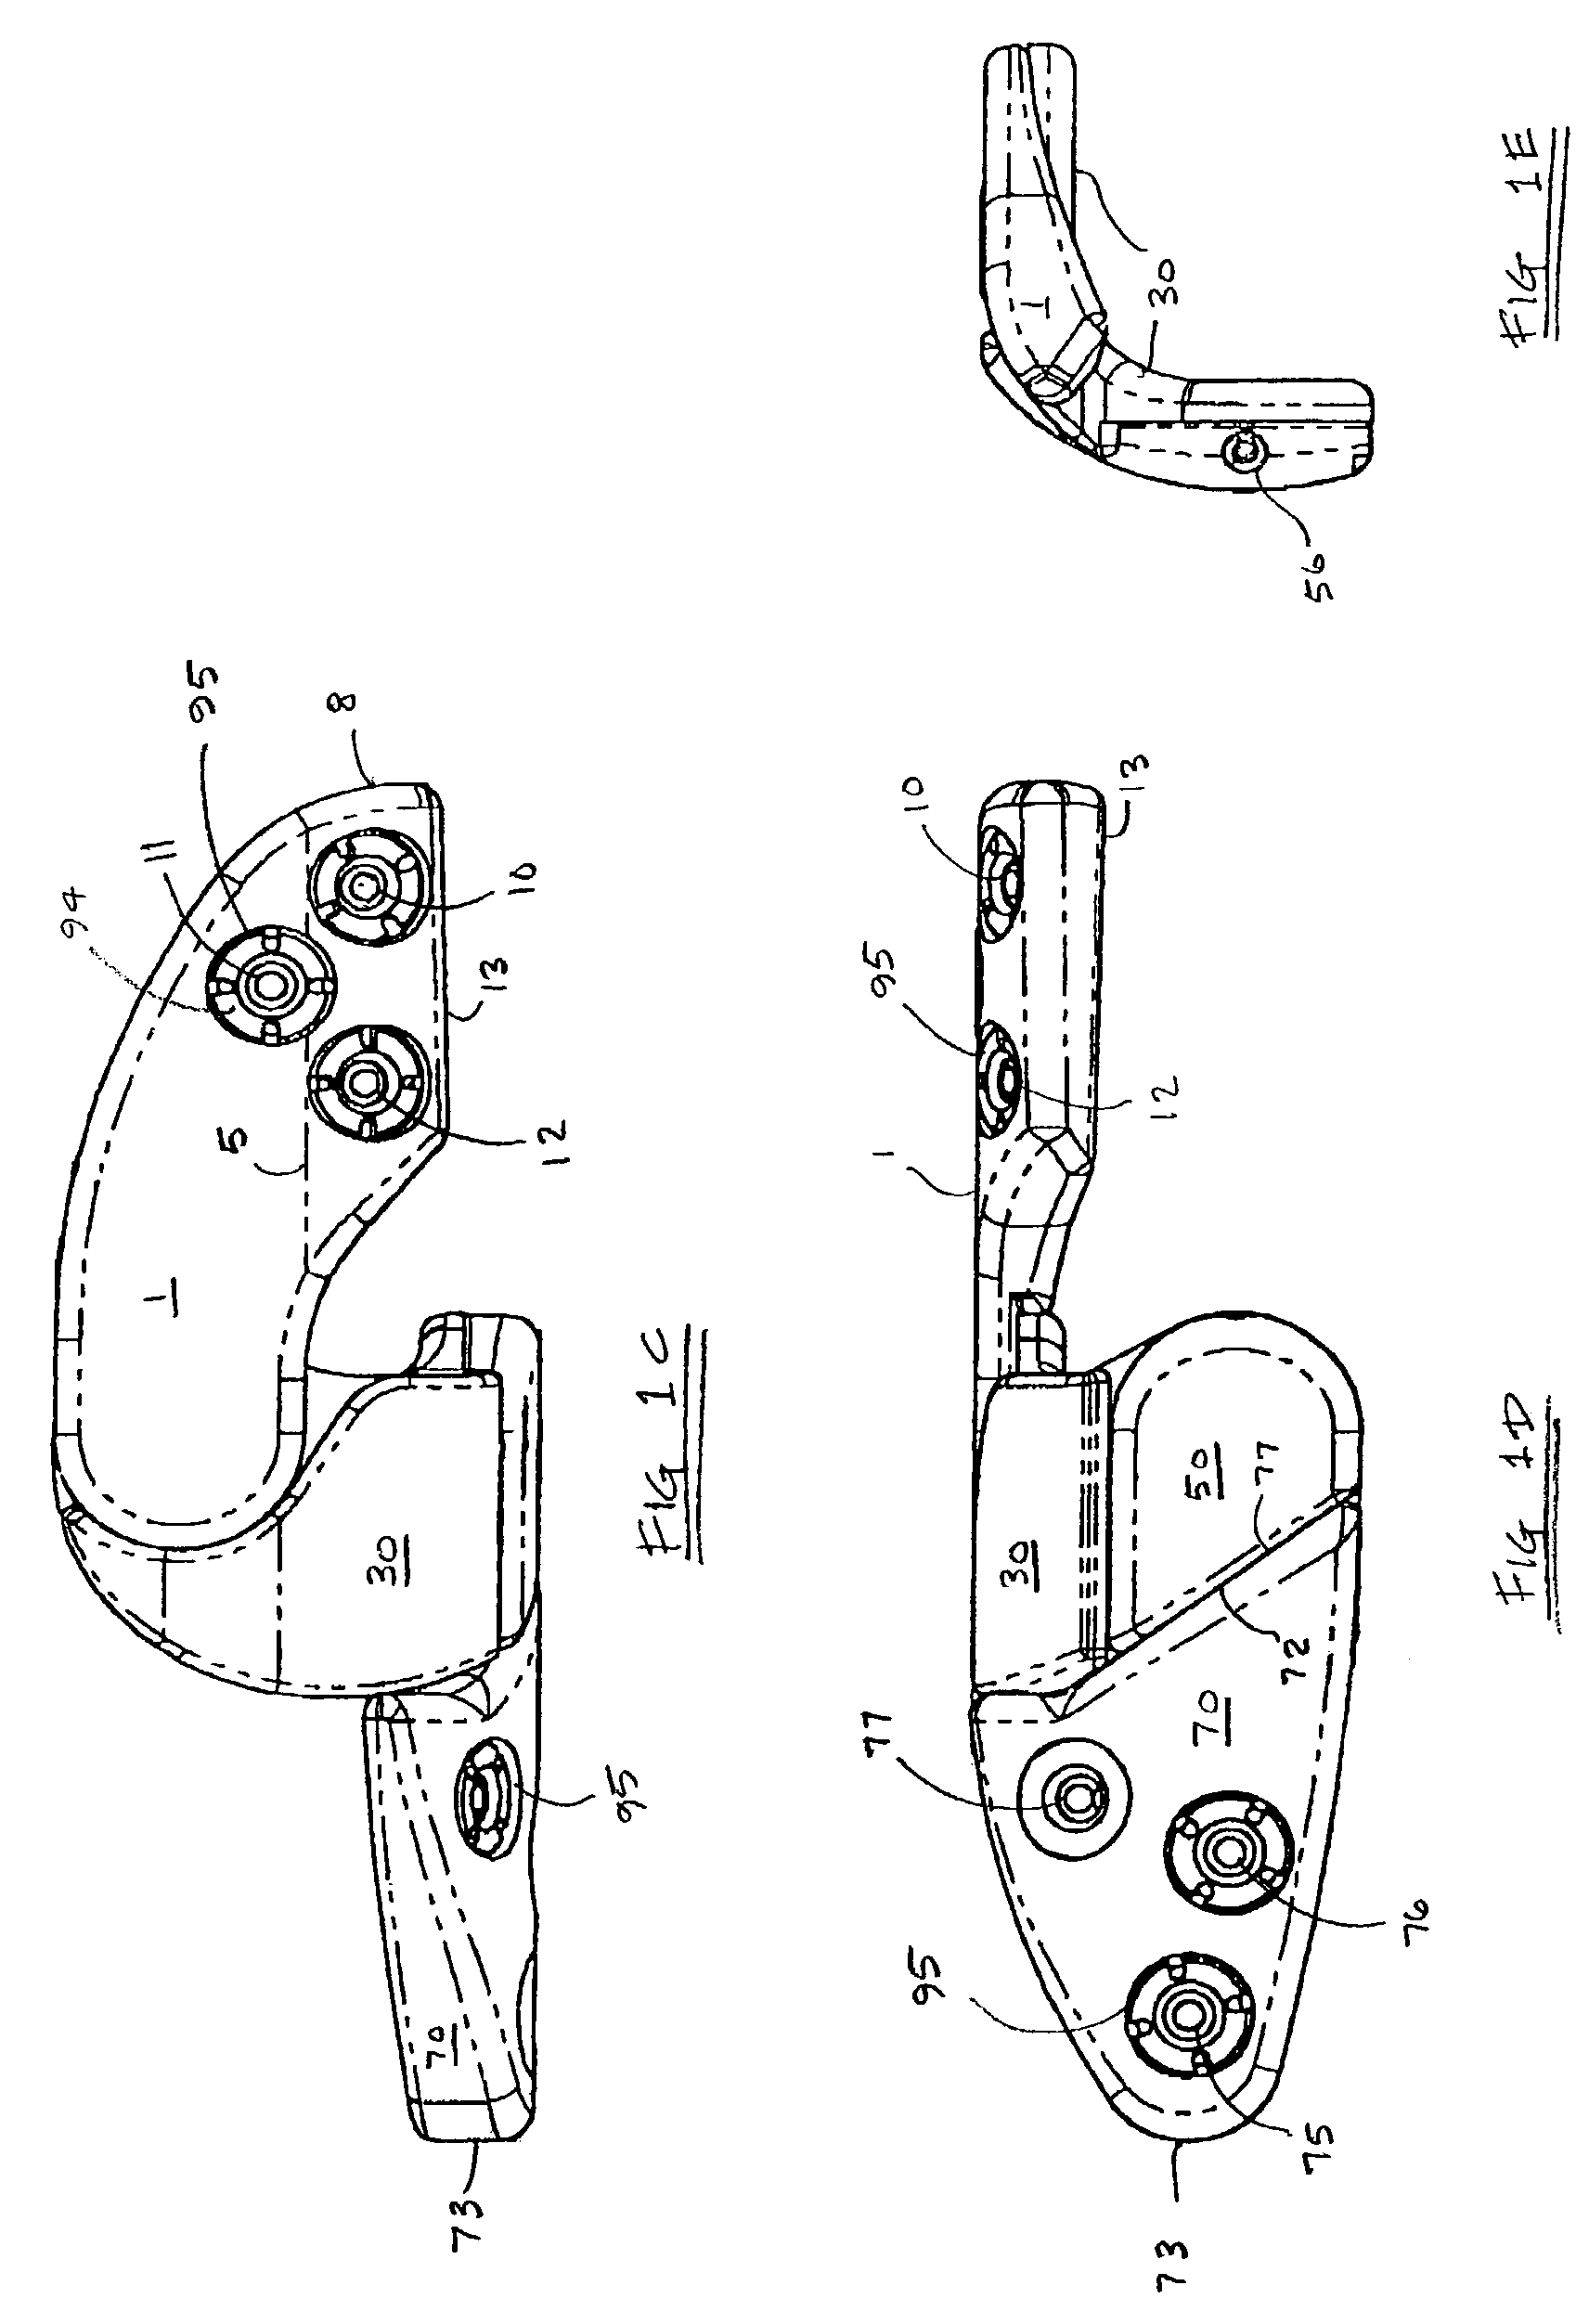 Apparatus for dynamic external fixation of distal radius and wrist fractures